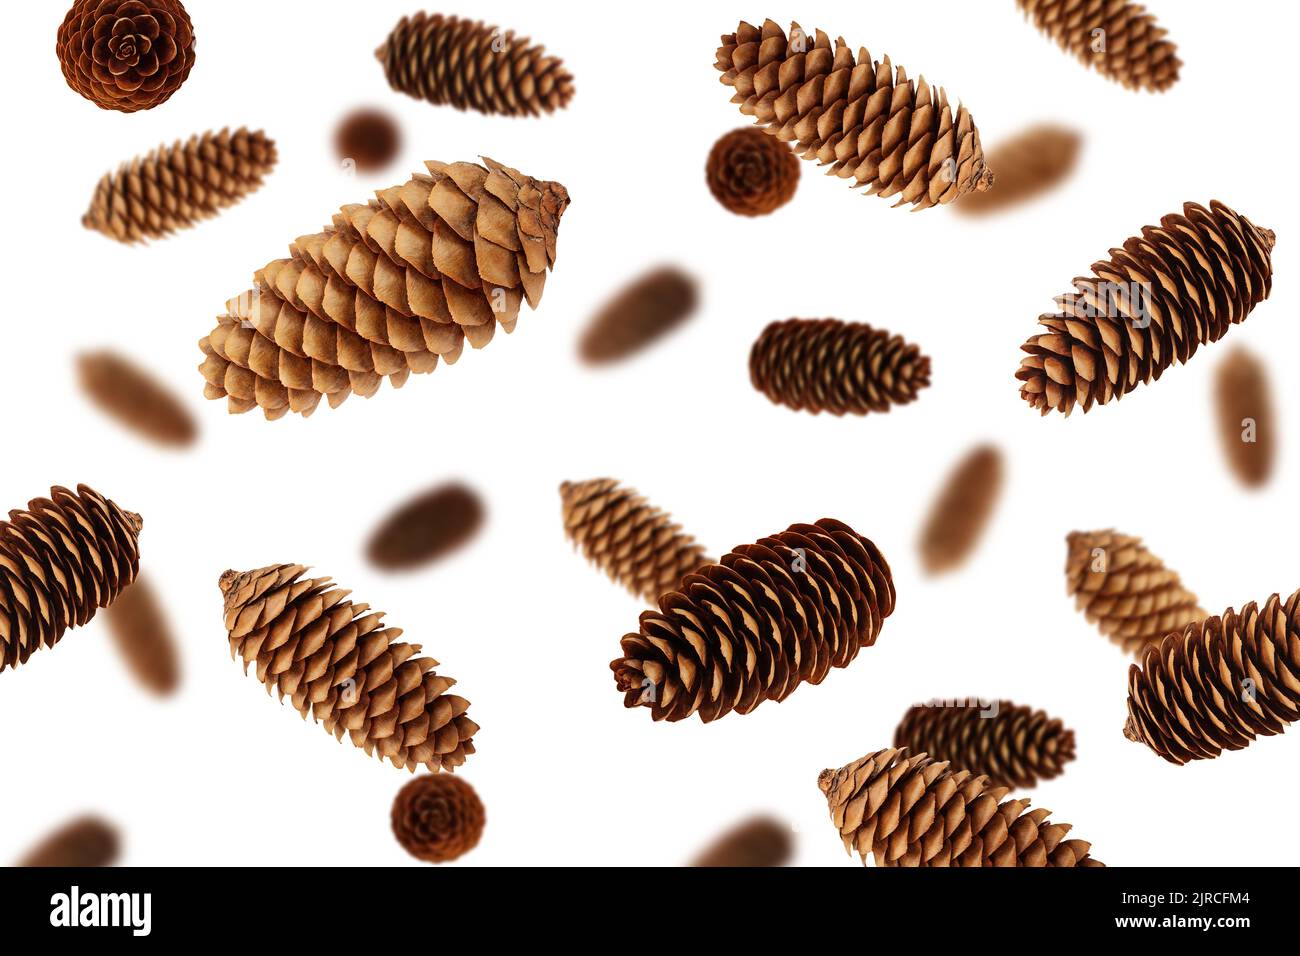 Pine cone isolated on white background, selective focus Stock Photo